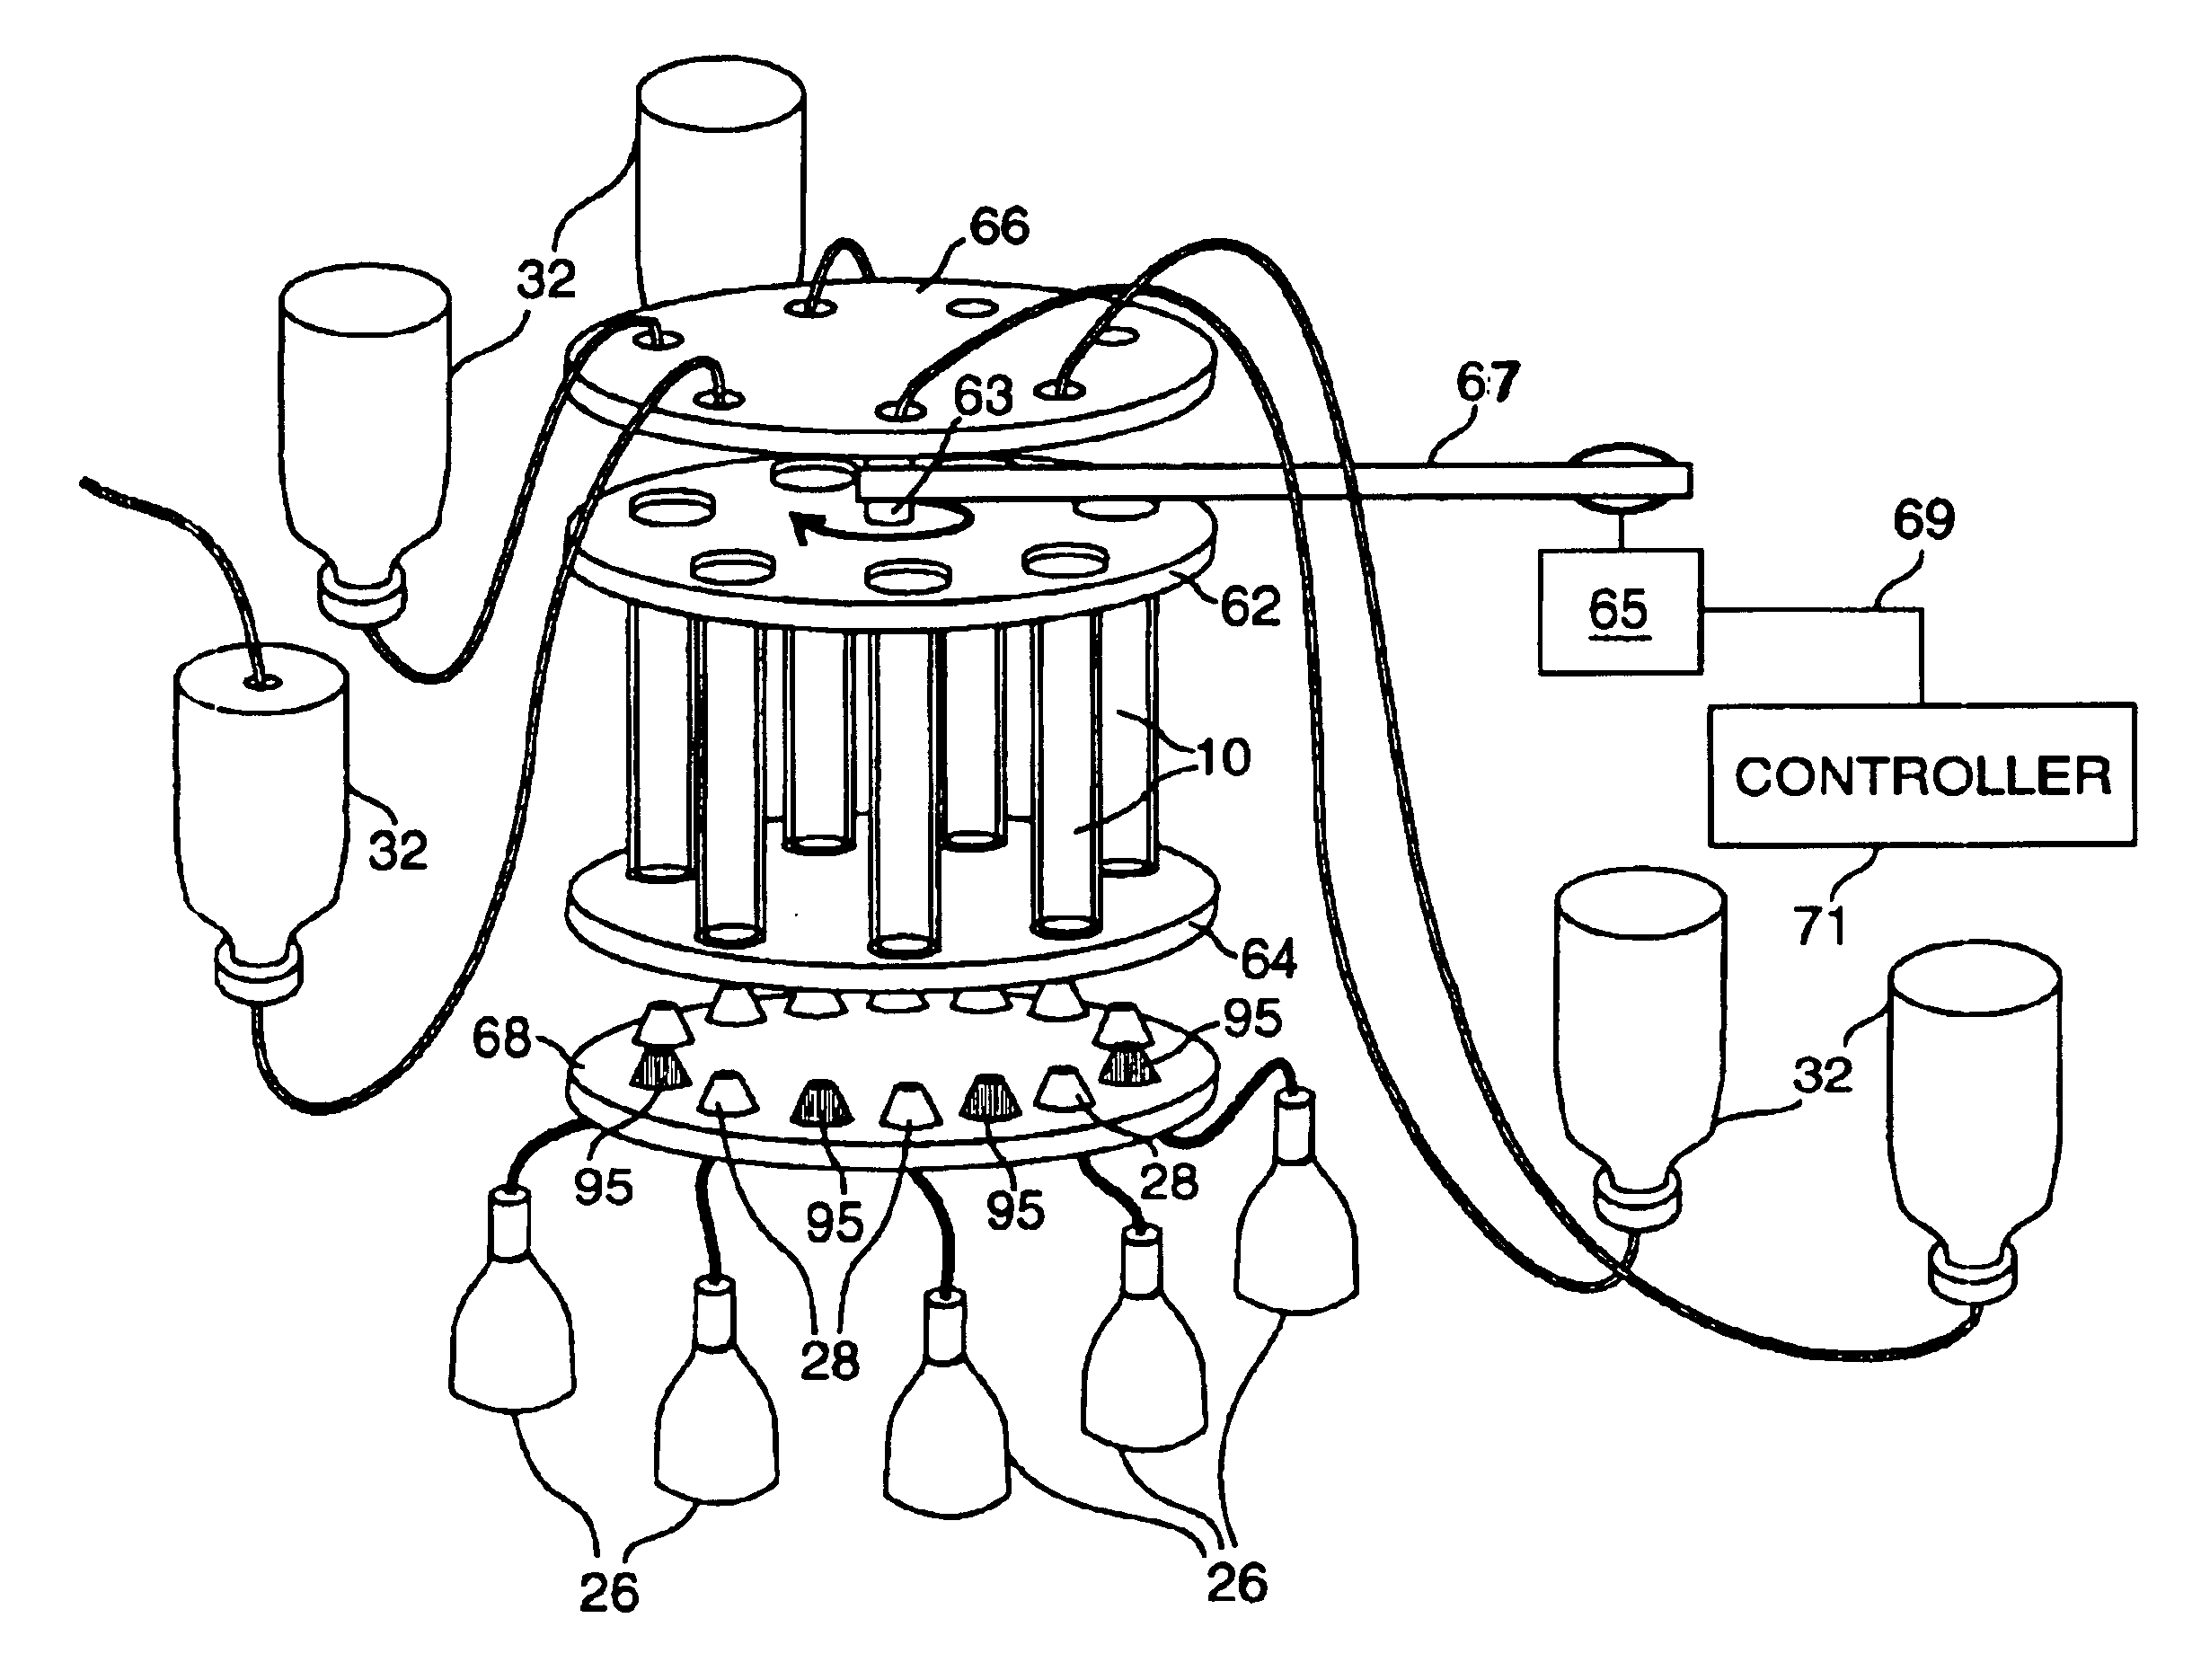 Method and apparatus for universal fluid exchange